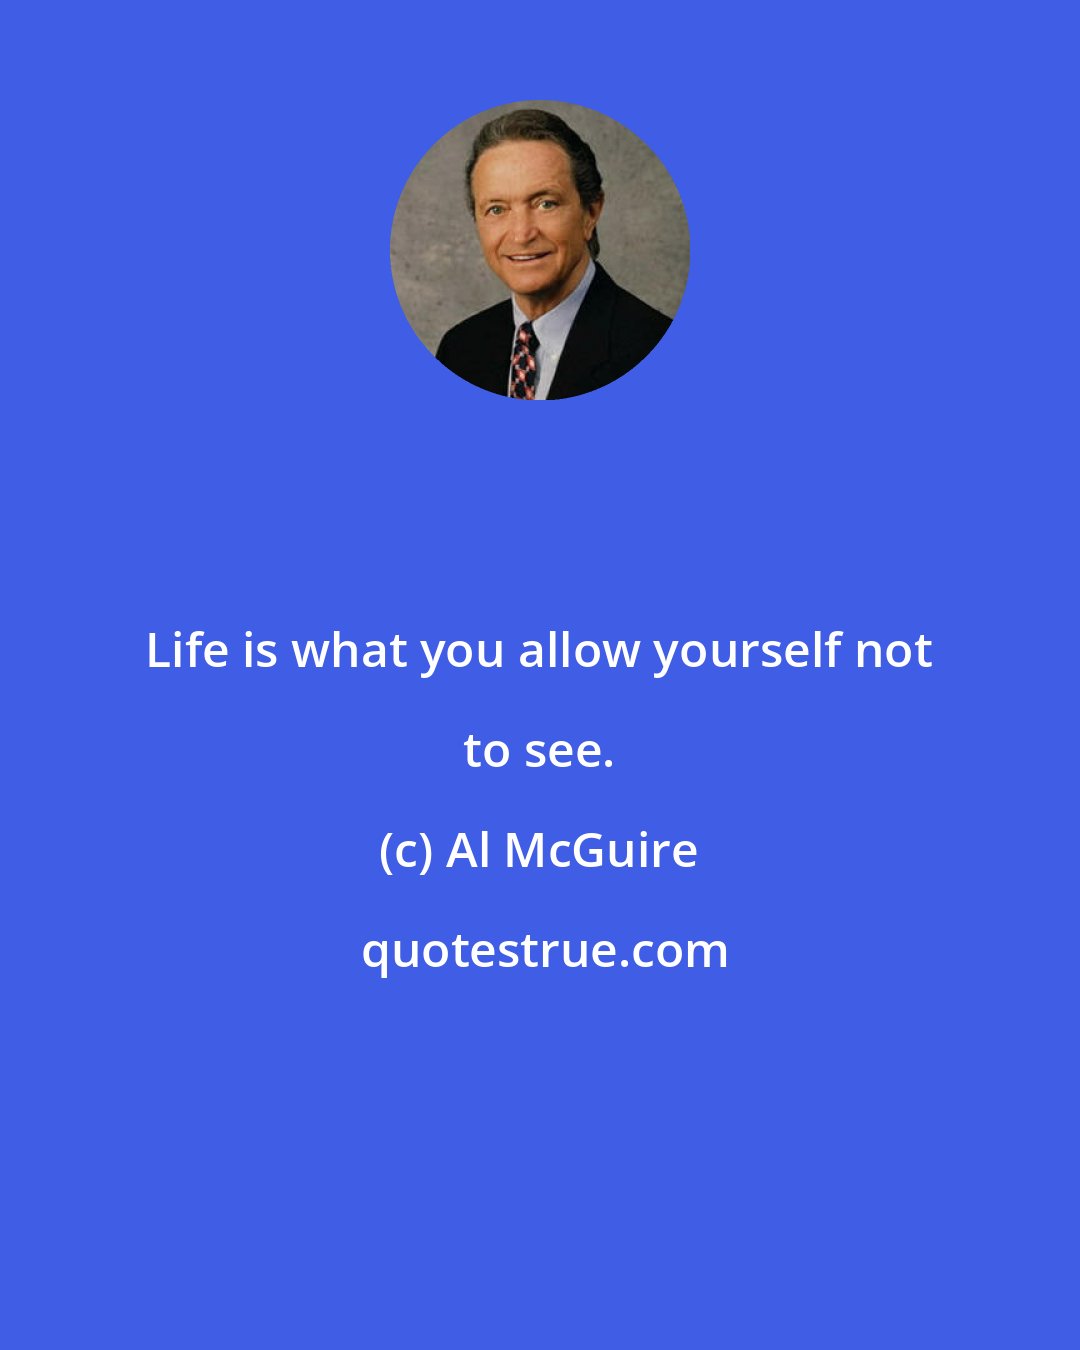 Al McGuire: Life is what you allow yourself not to see.